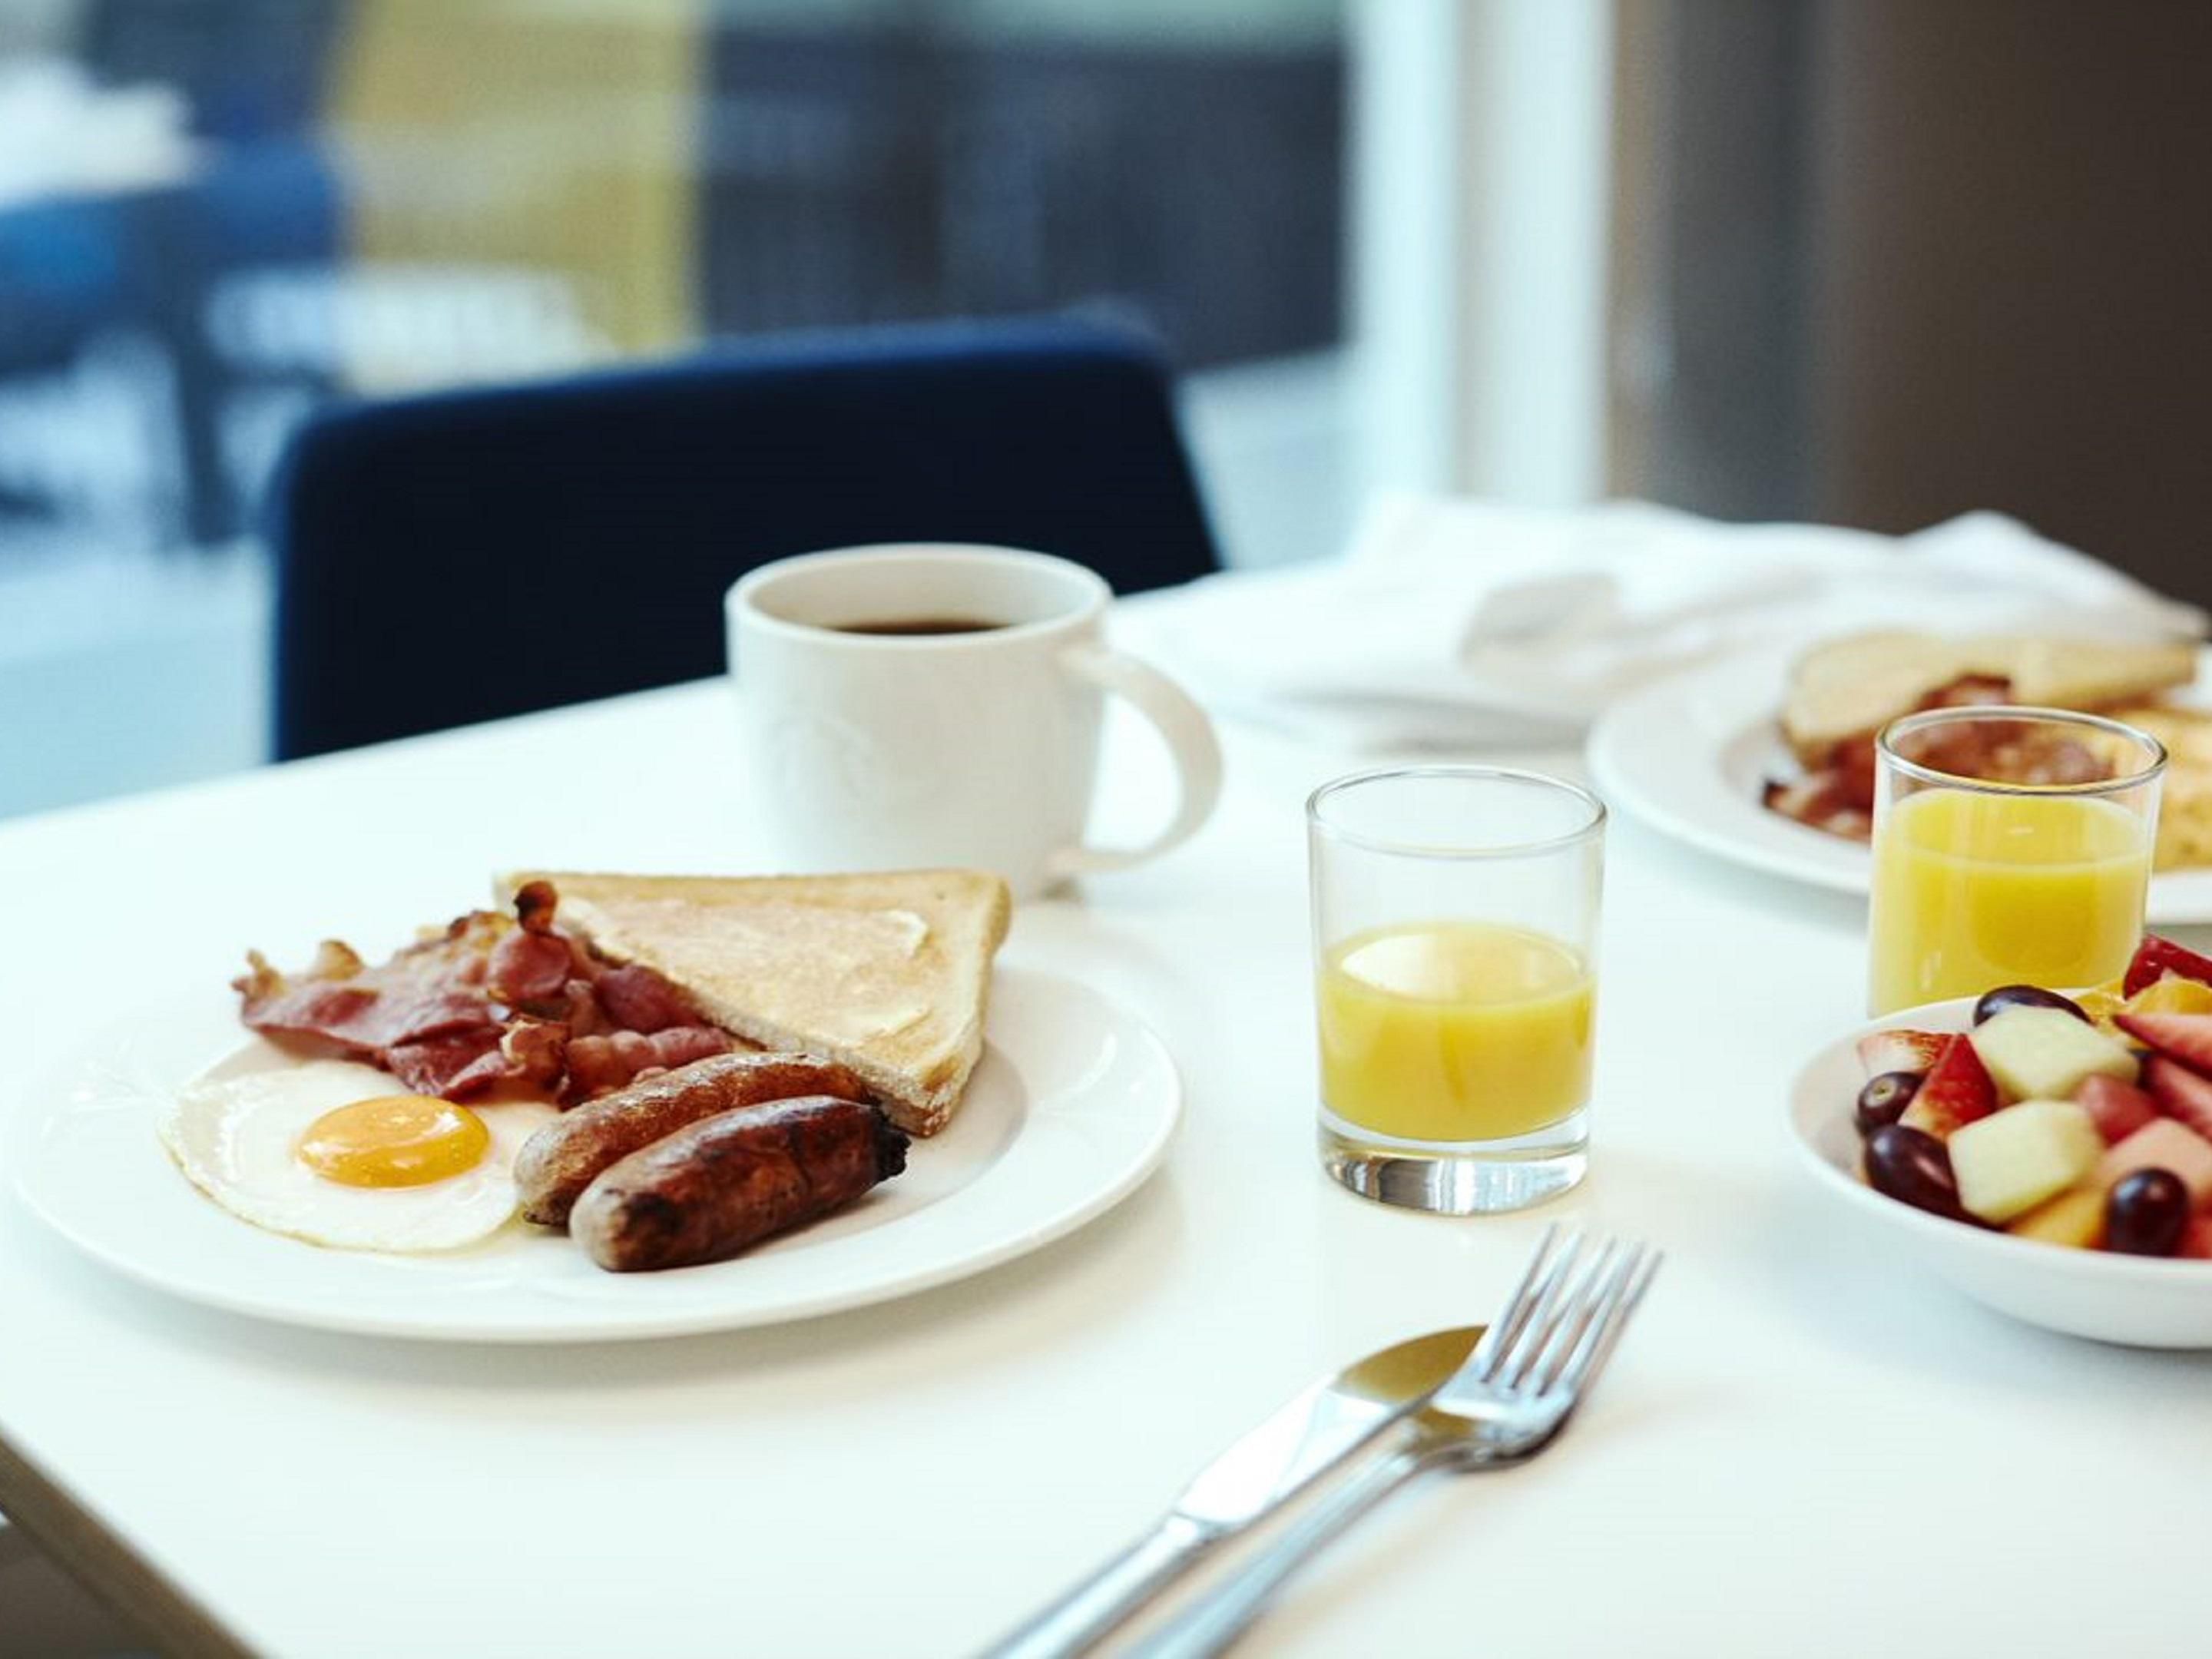 Start the day with our breakfast served daily, featuring a range of delicious hot and cold items sure to please everyone!